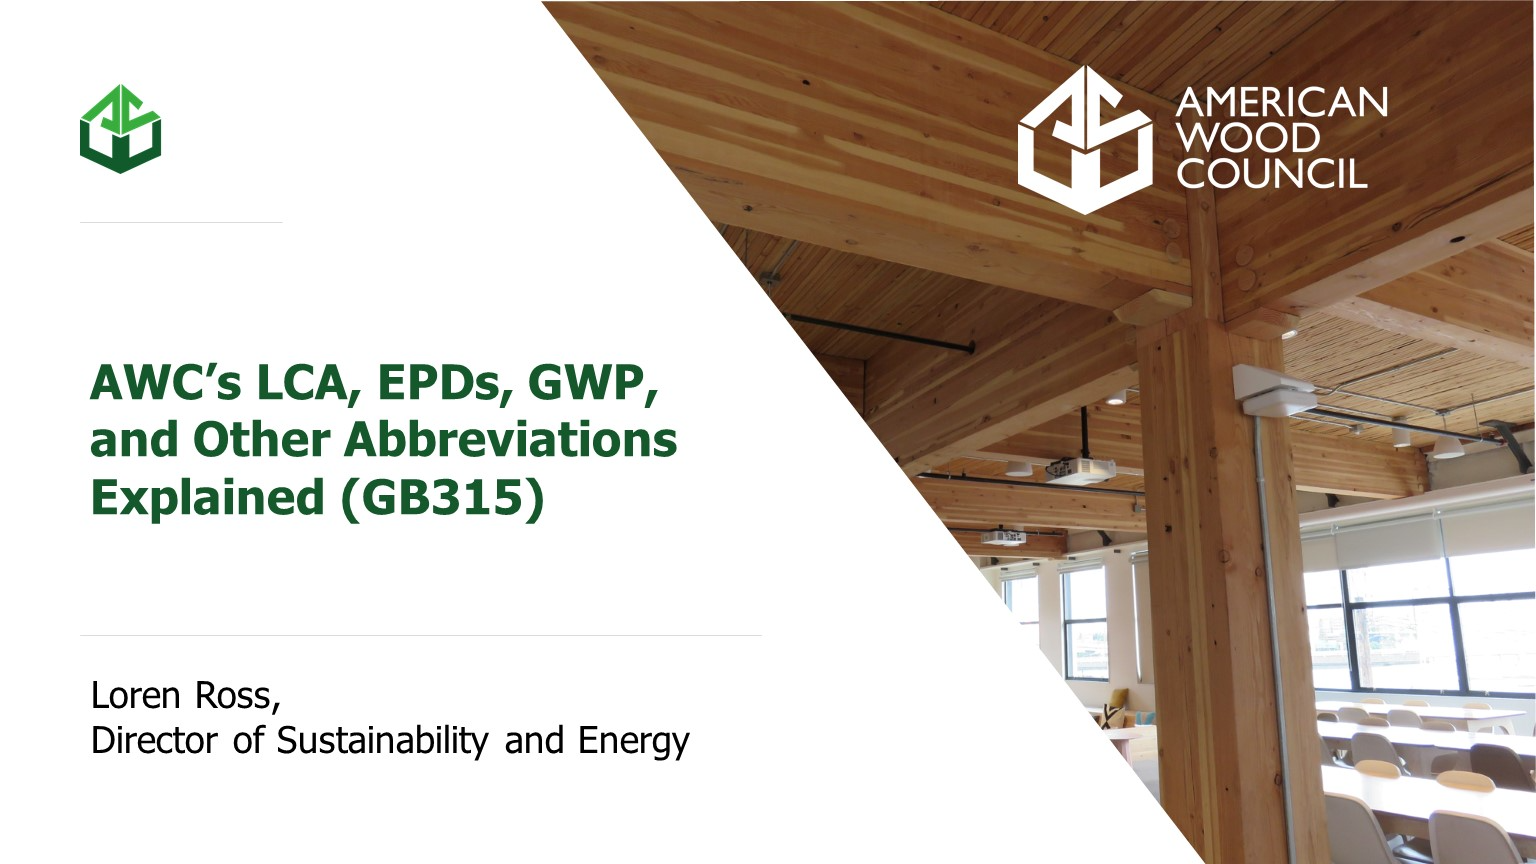 Sustainability: AWC's LCA, EPDs, GWP and Other Abbreviations Explained - GB315